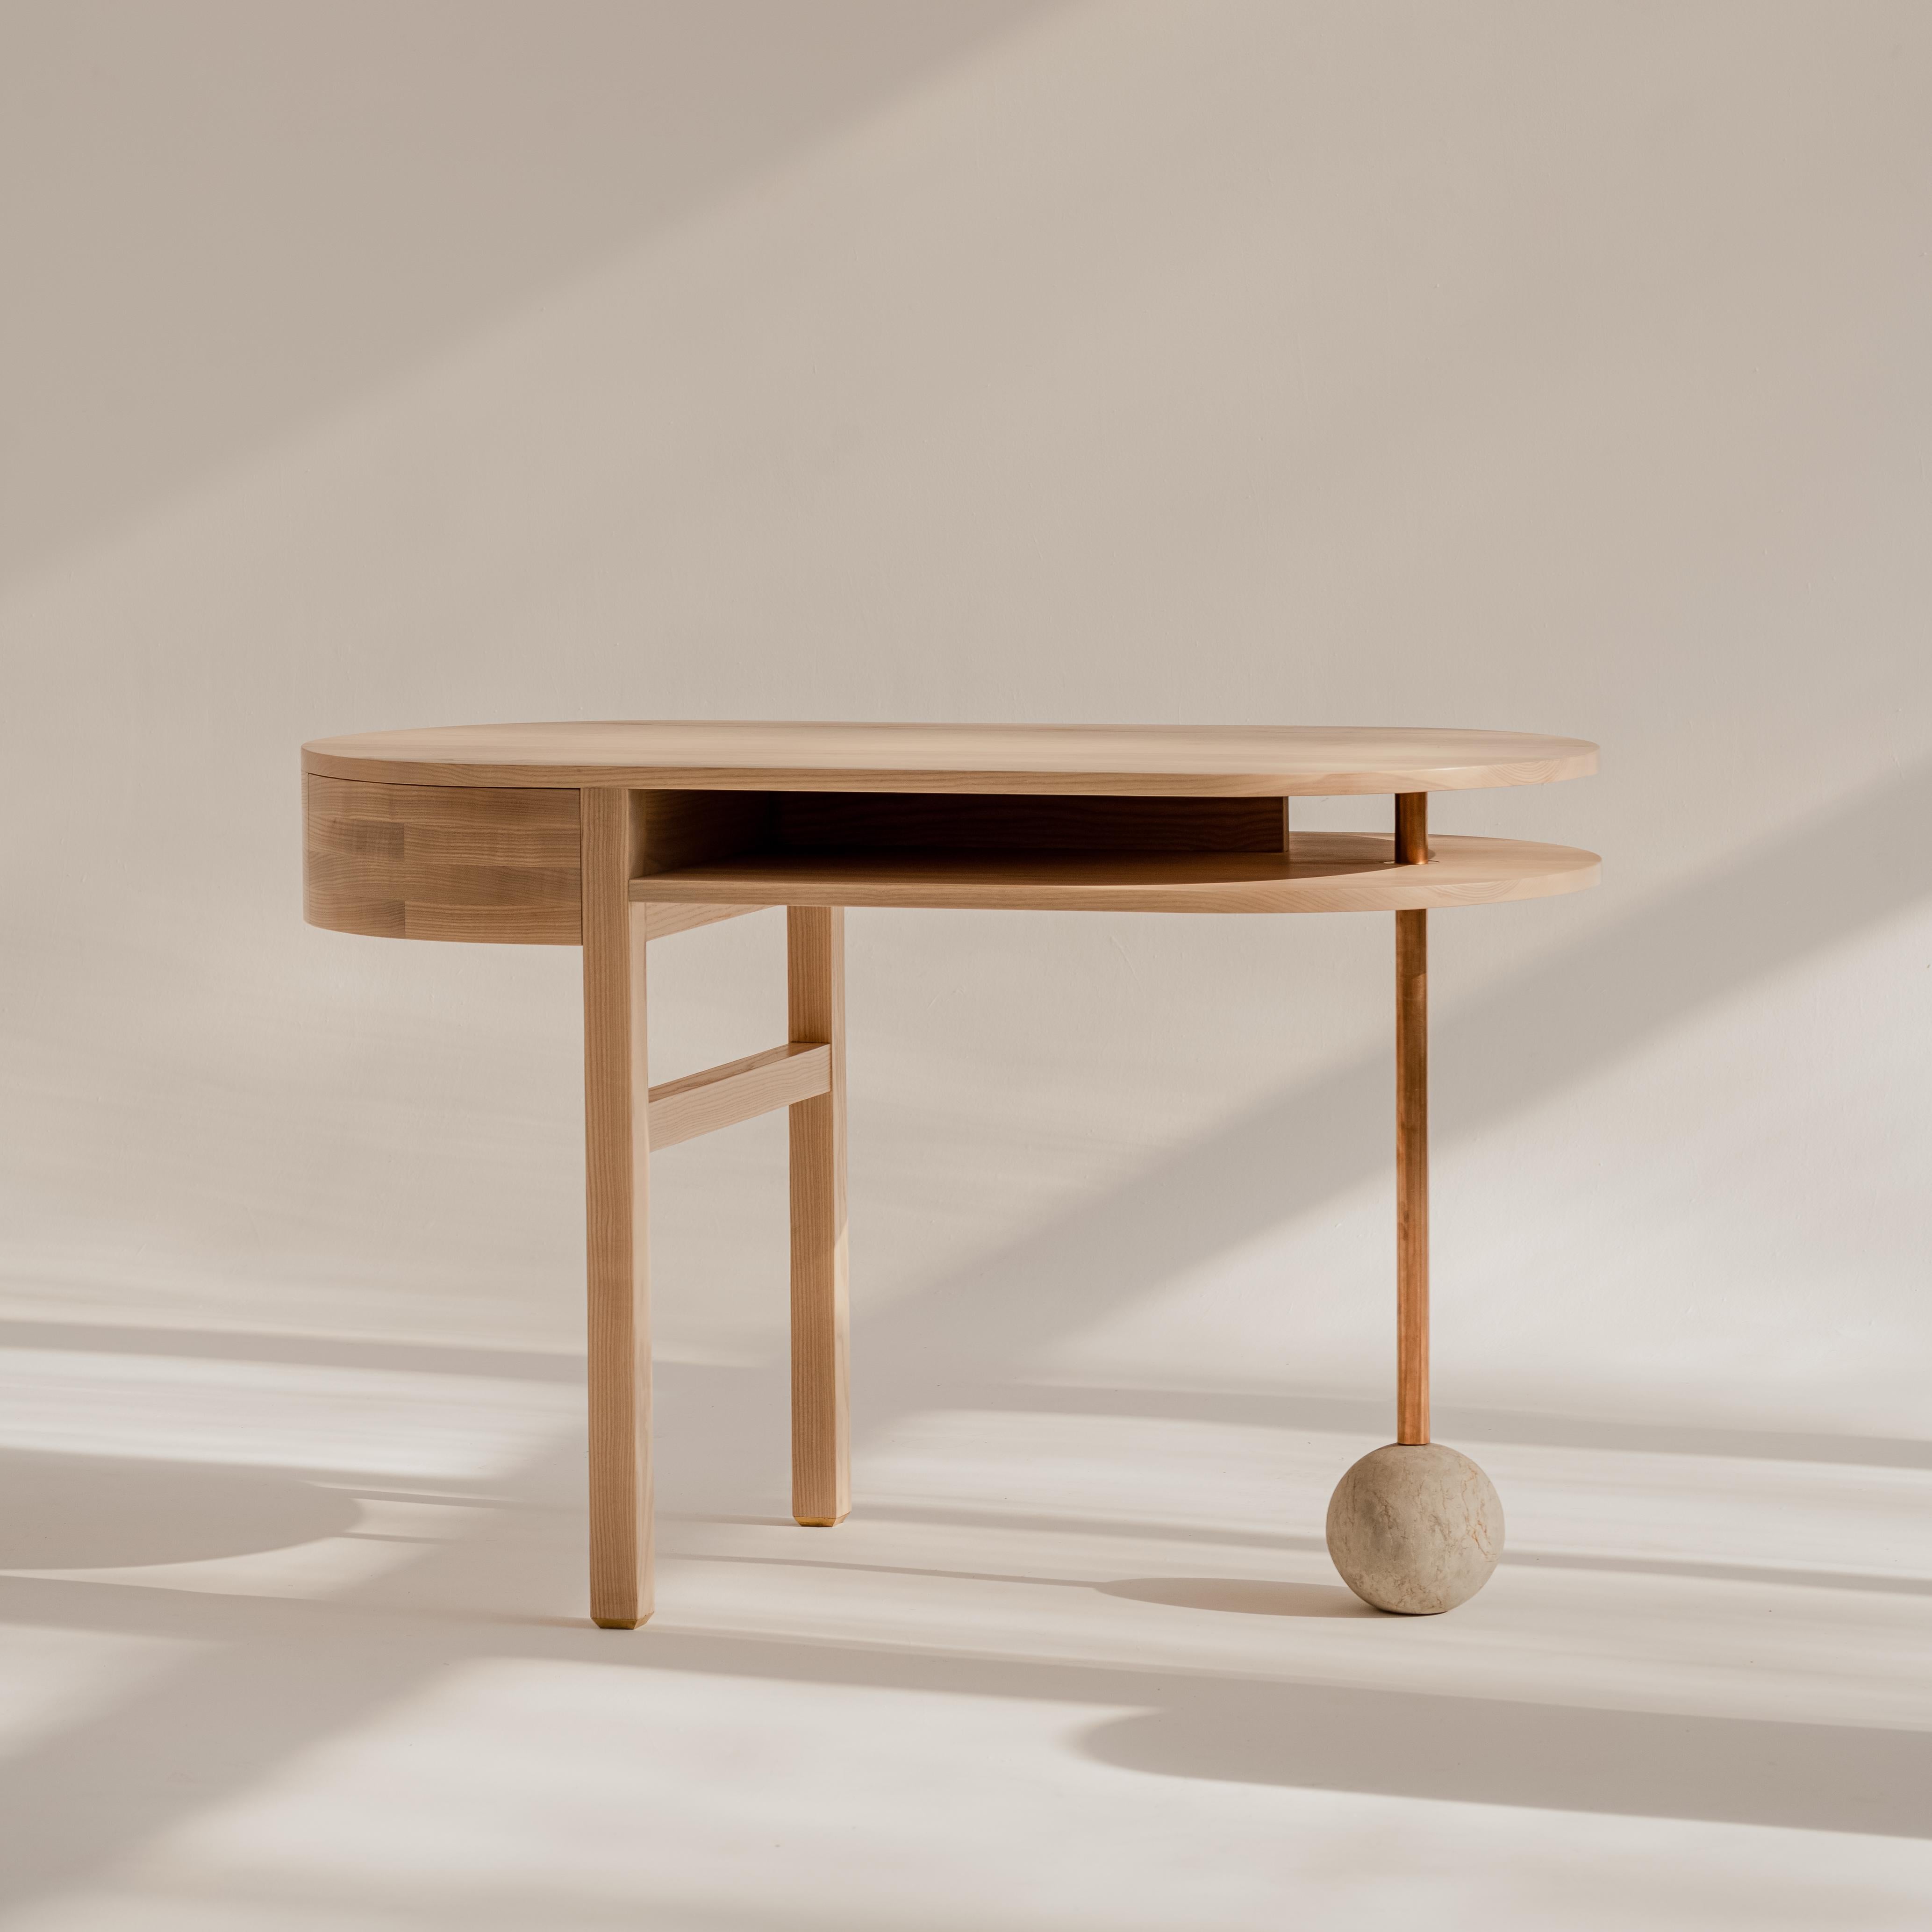 Square drop console table by Nów.
Designed by Square Drop.
Dimensions: D 60 x W 120 x H 76 cm
Materials: stained, solid ash wood, brass hardware, natural stone.

Agnieszka Sniadewicz-Swica, owner of Square Drop restoration lab, has been an art